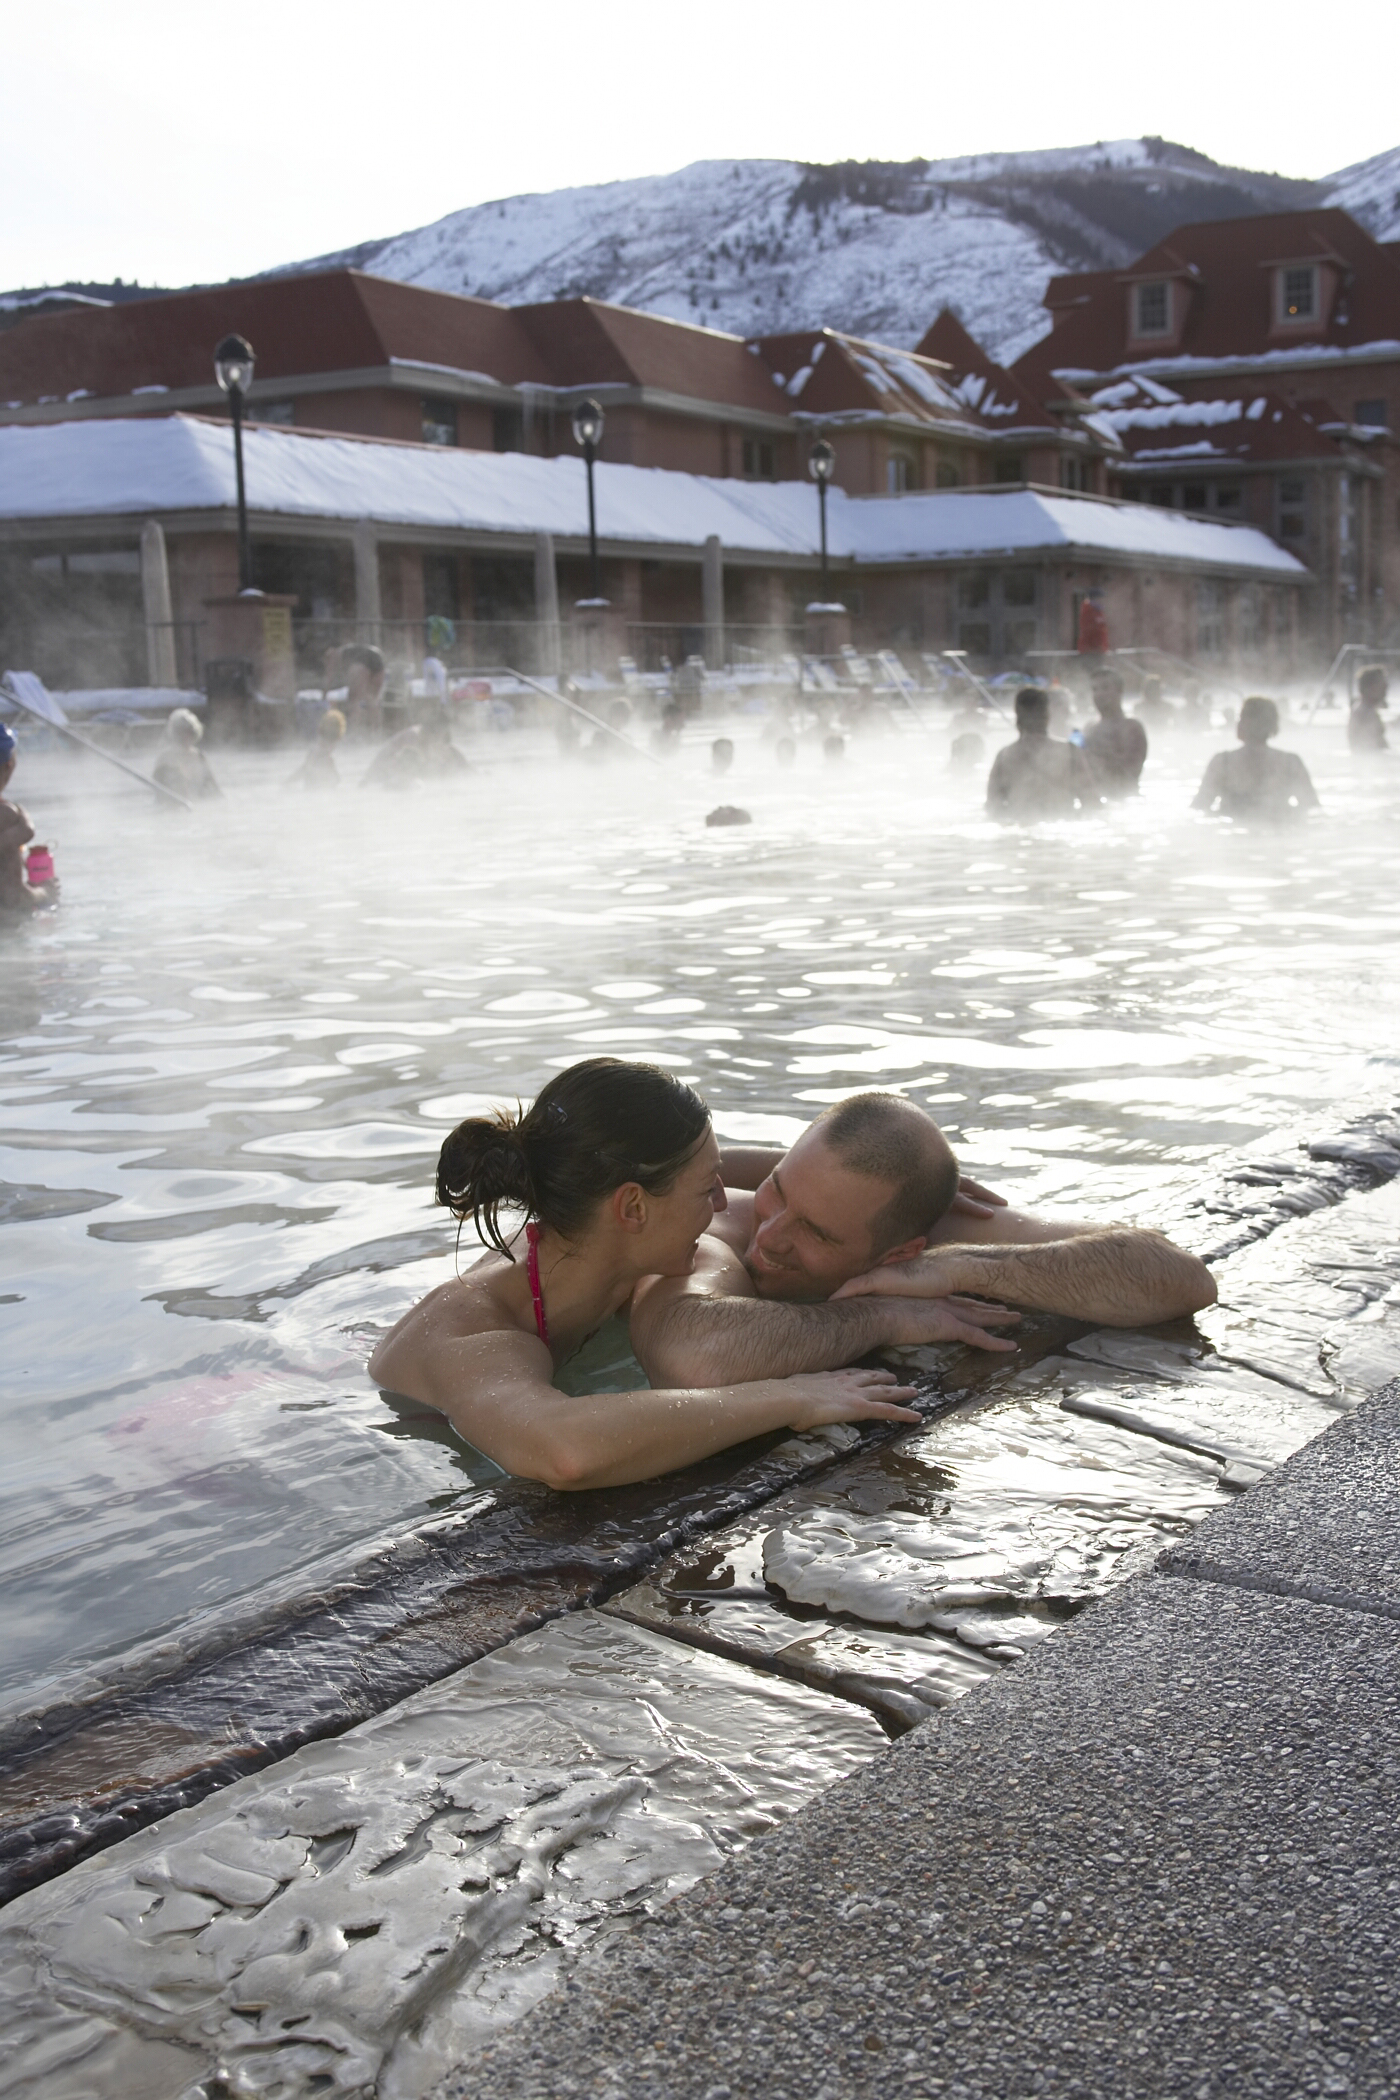 Hydrotherapy at Glenwood Hot Springs is a  tradition which dates back well over 100 years